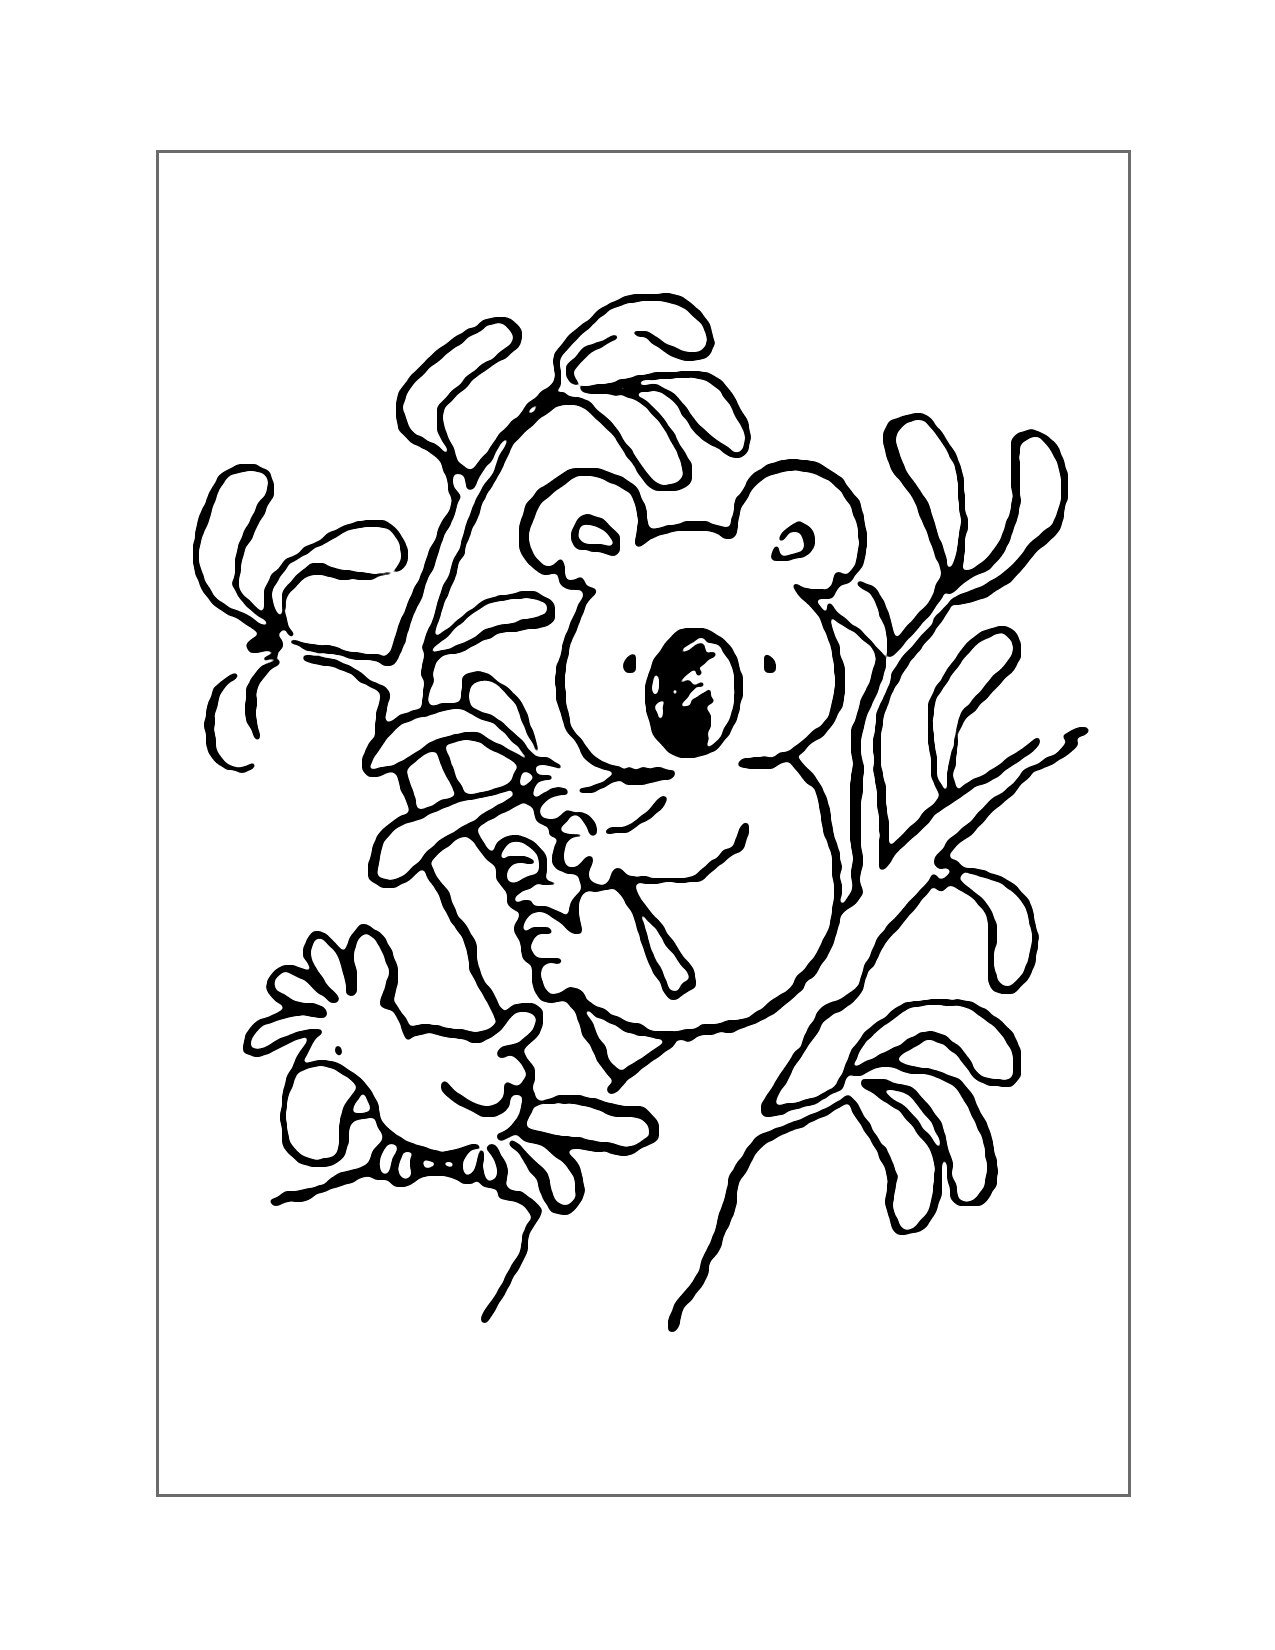 Koala In Tree With Parrot Coloring Page